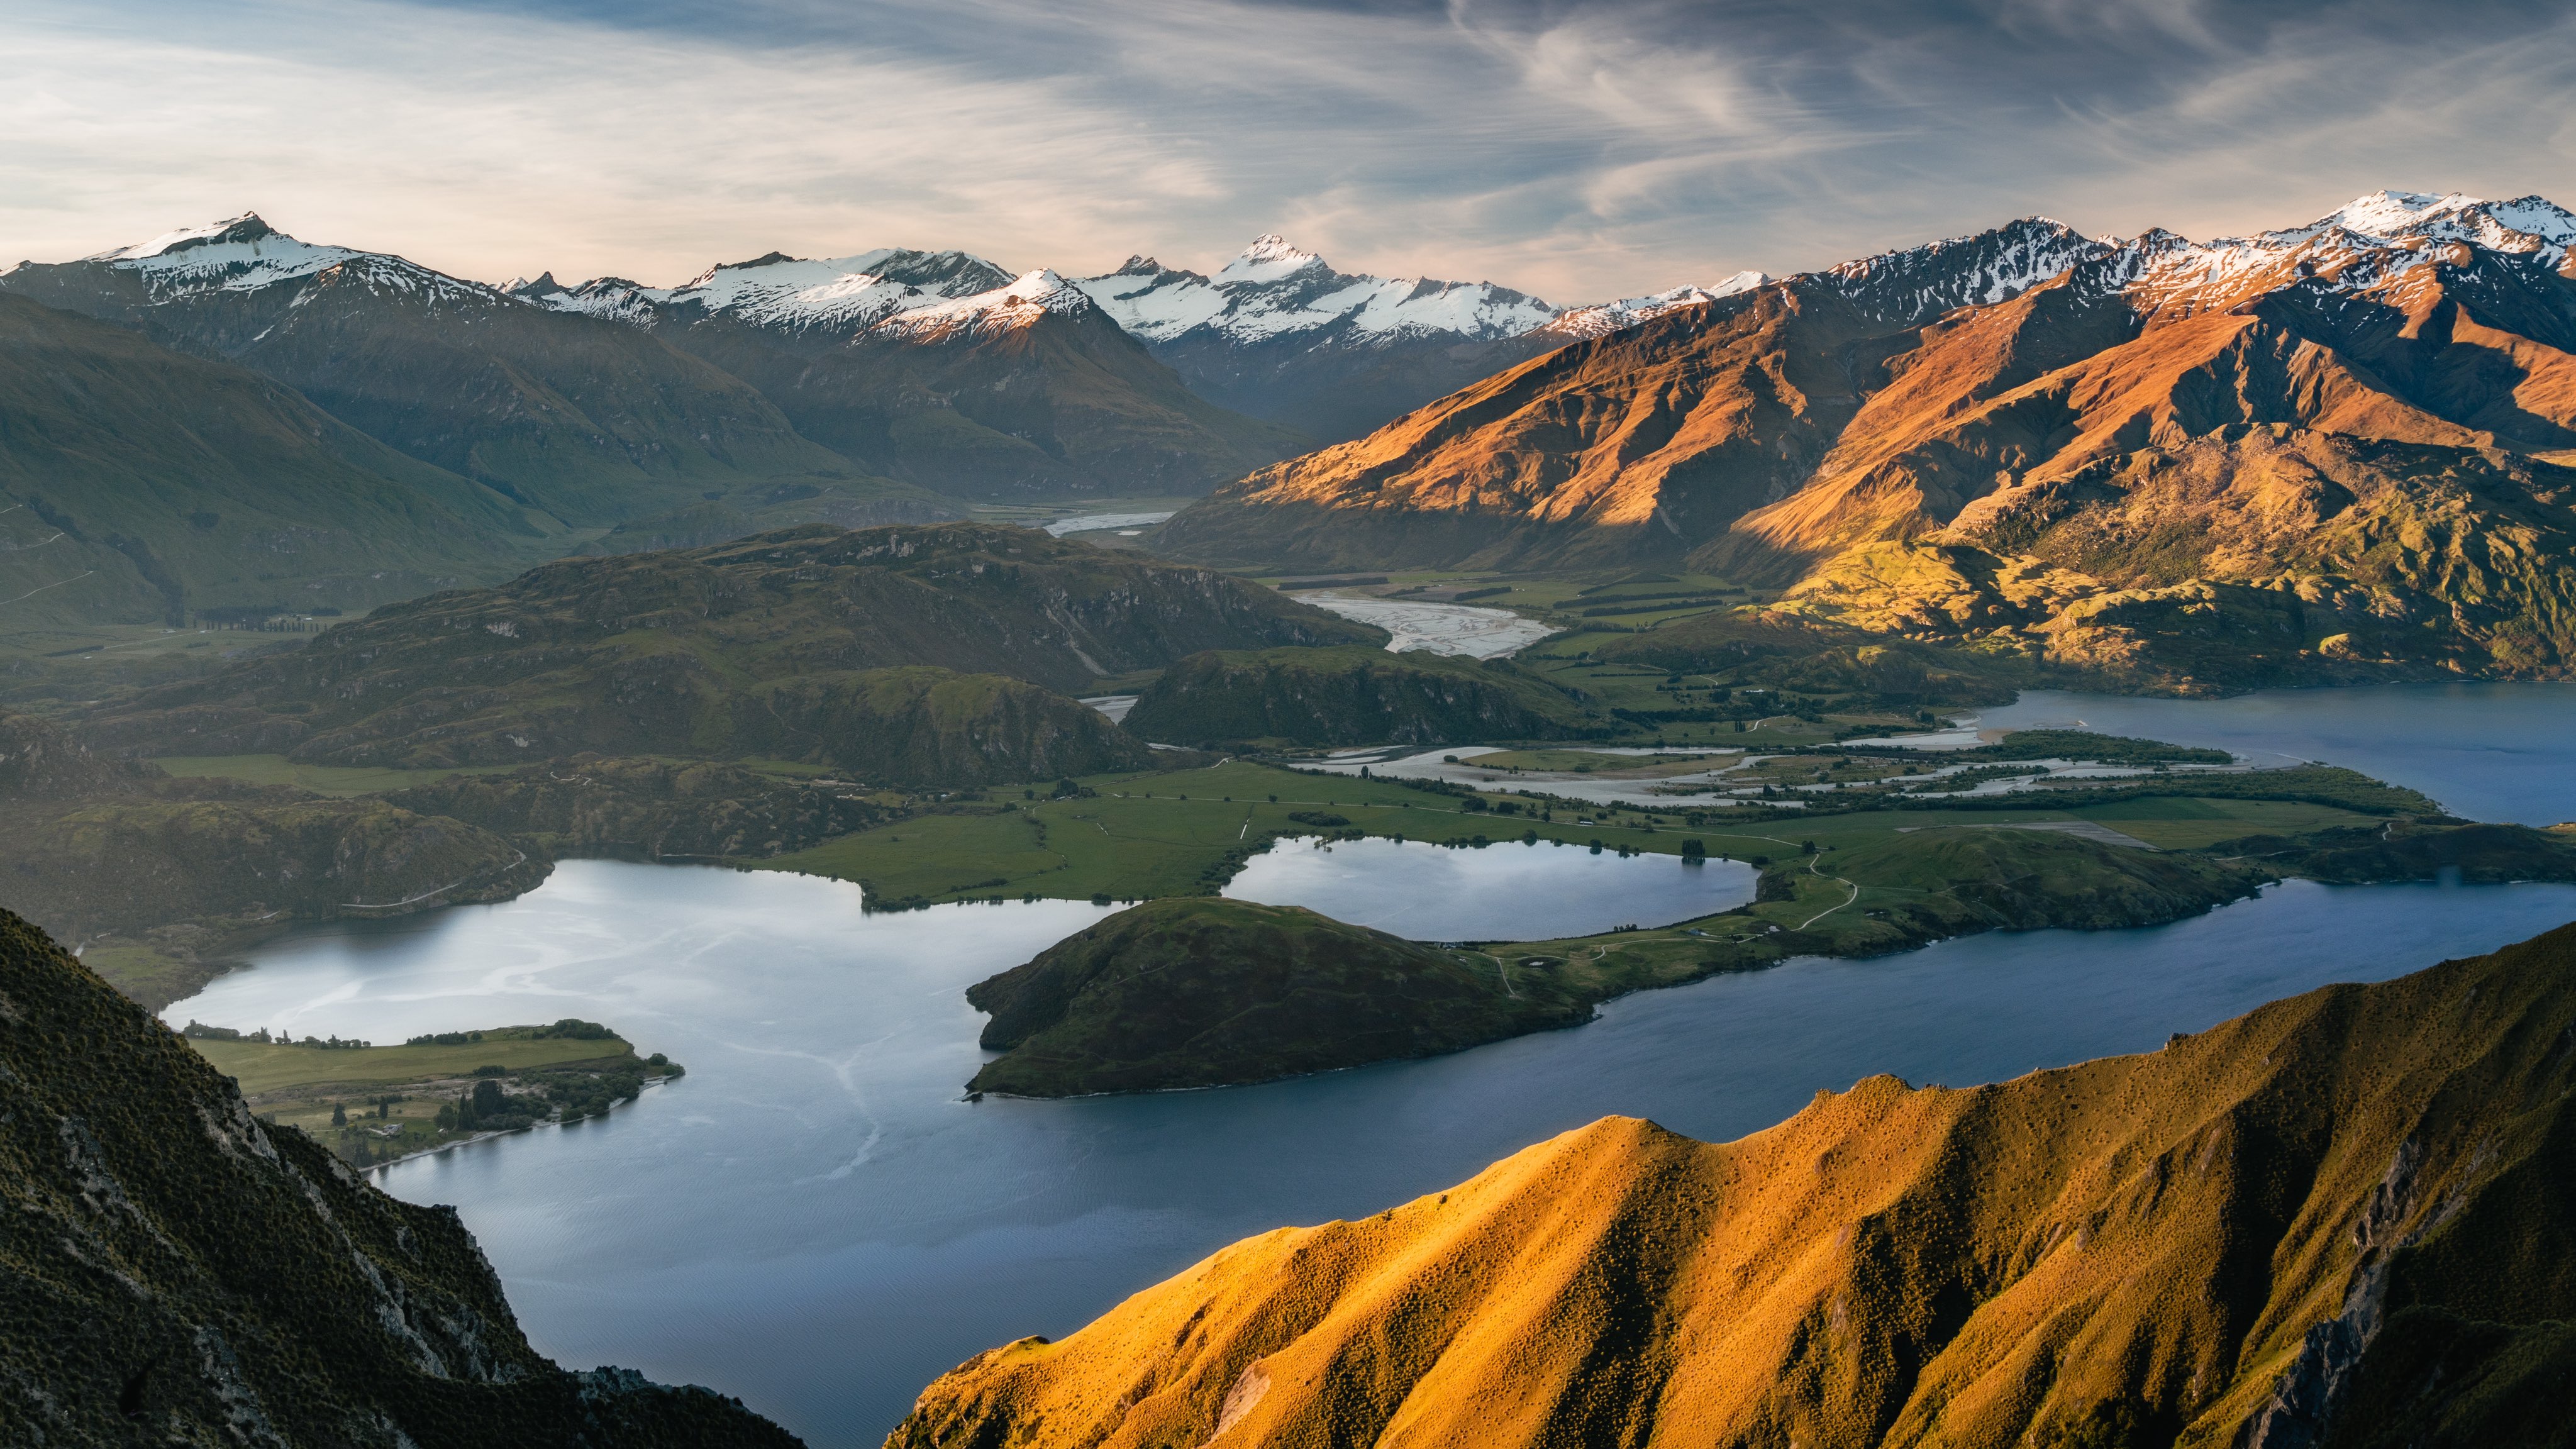 General 4096x2304 mountains landscape snowy mountain lake sunset water nature snow New Zealand